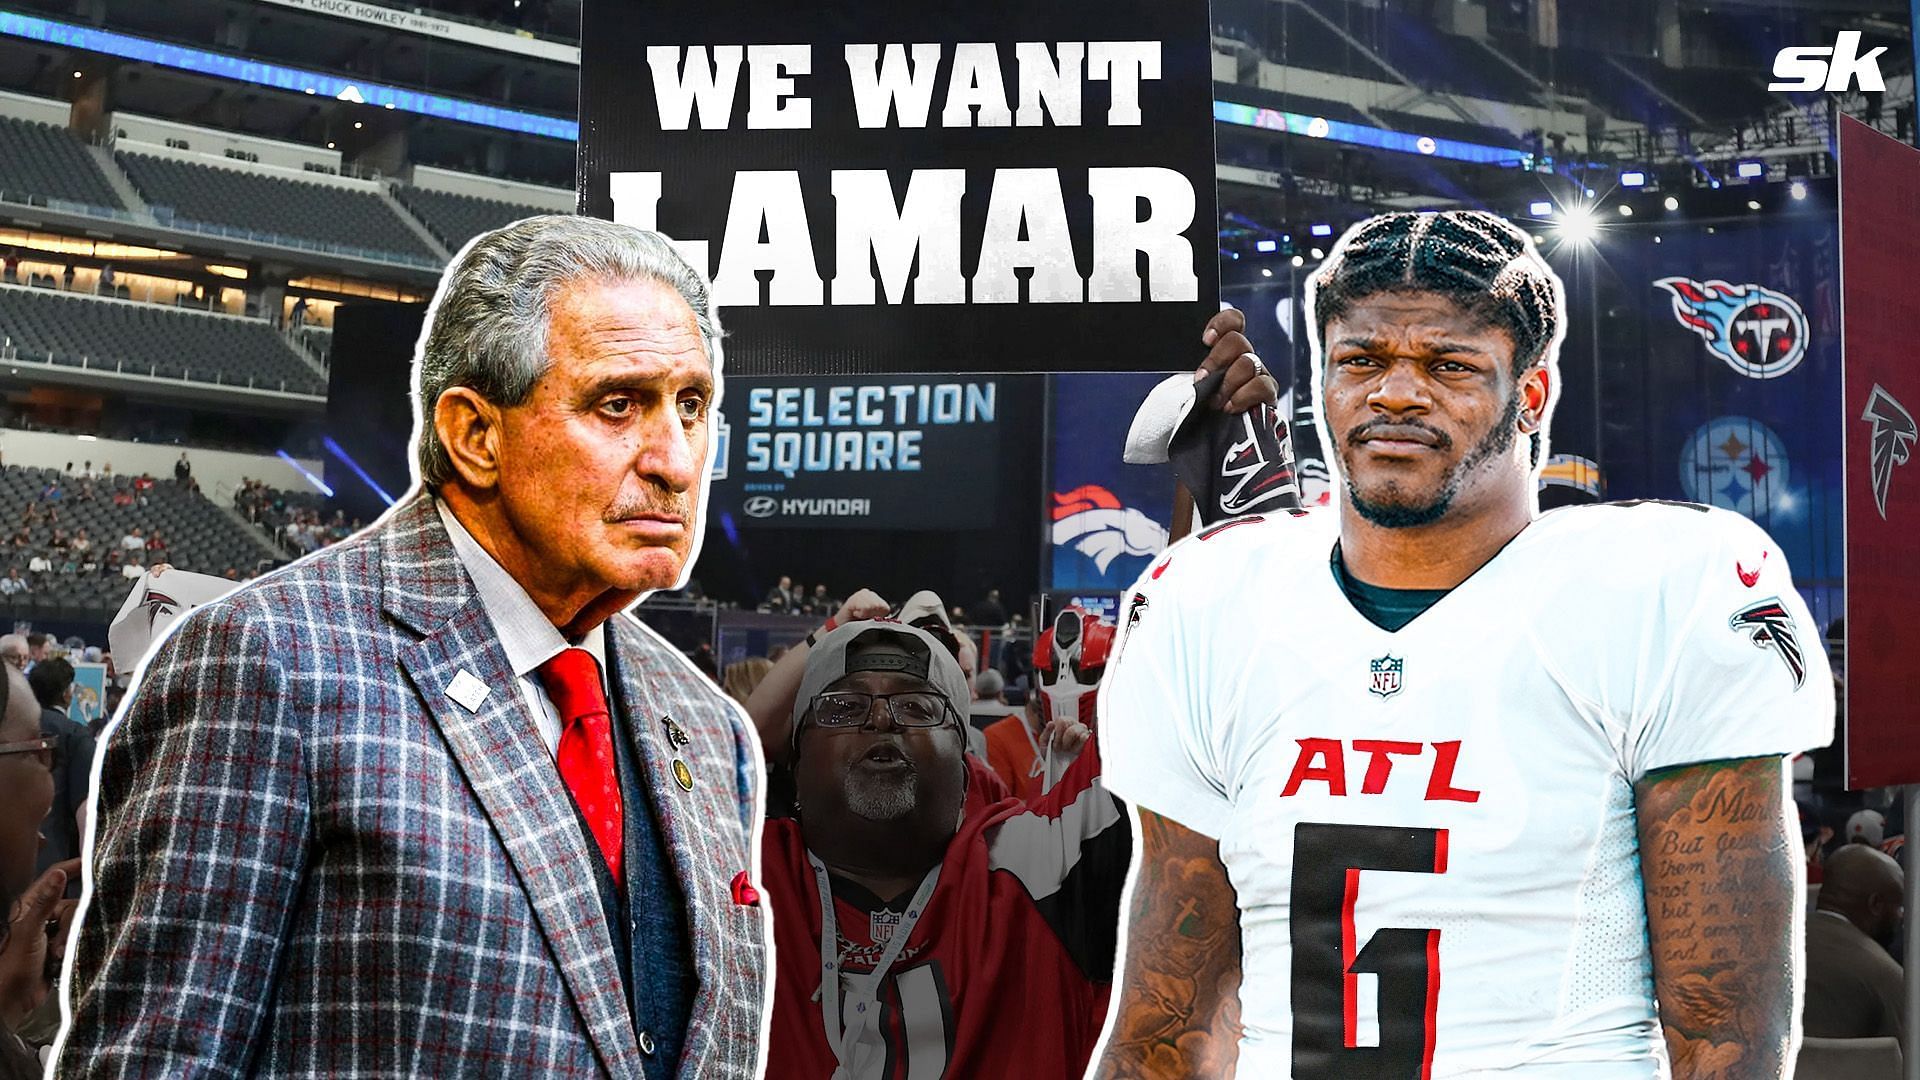 Falcons insider reveals details about Arthur Blank&rsquo;s interest in getting Lamar Jackson before Ravens QB